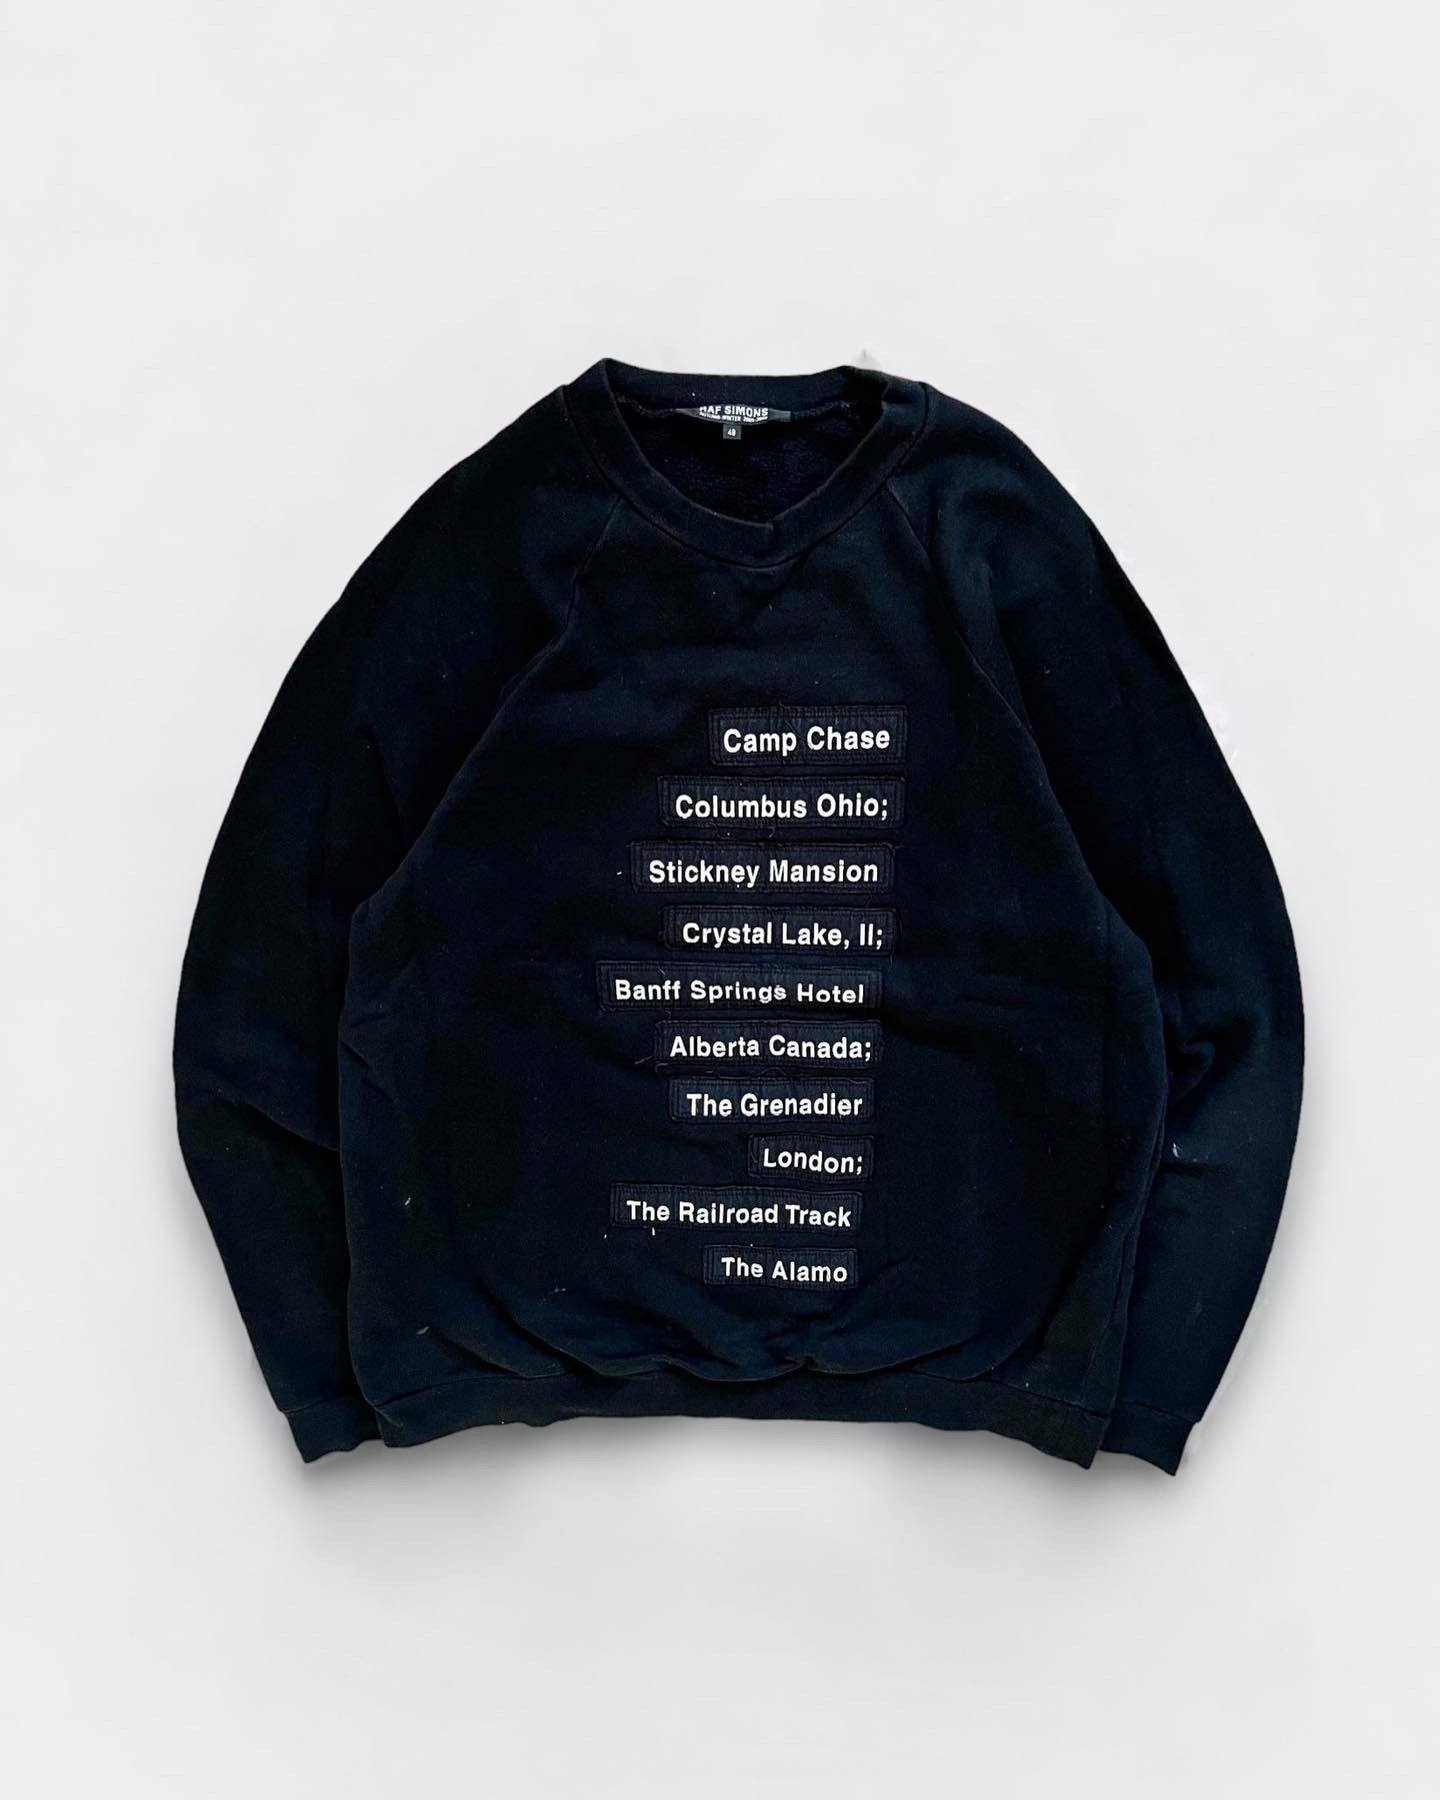 Raf Simons AW2005 ‘History Of My World’ List Patched Sweater - Size M